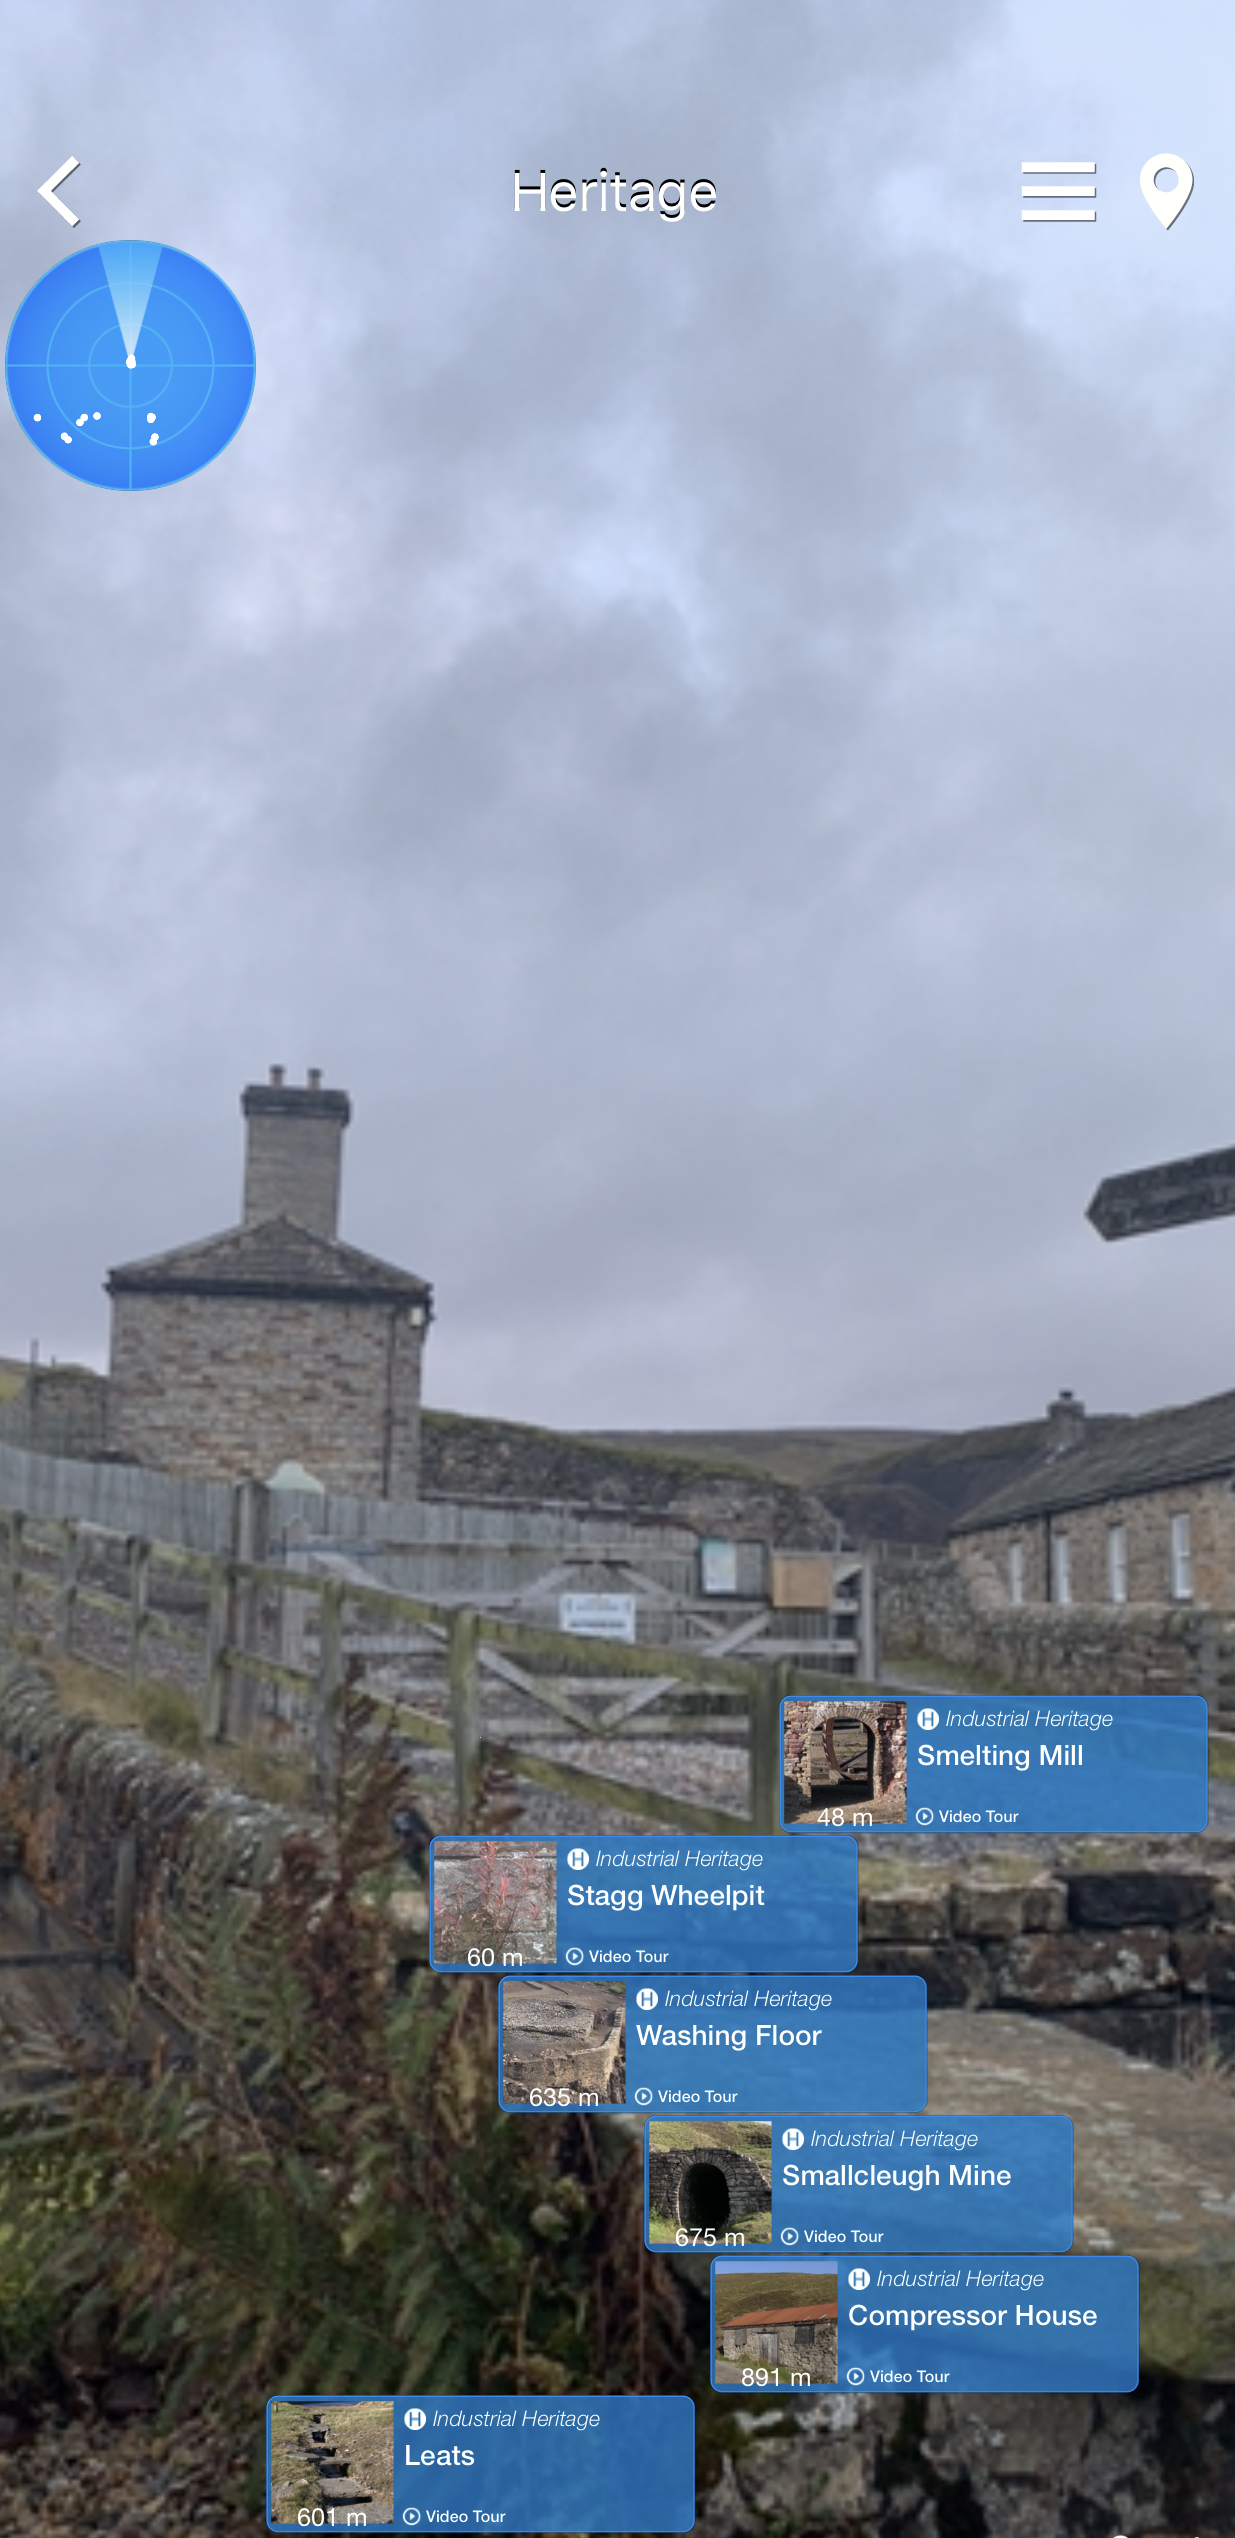 Heritage places discoverable in augmented reality on WAM